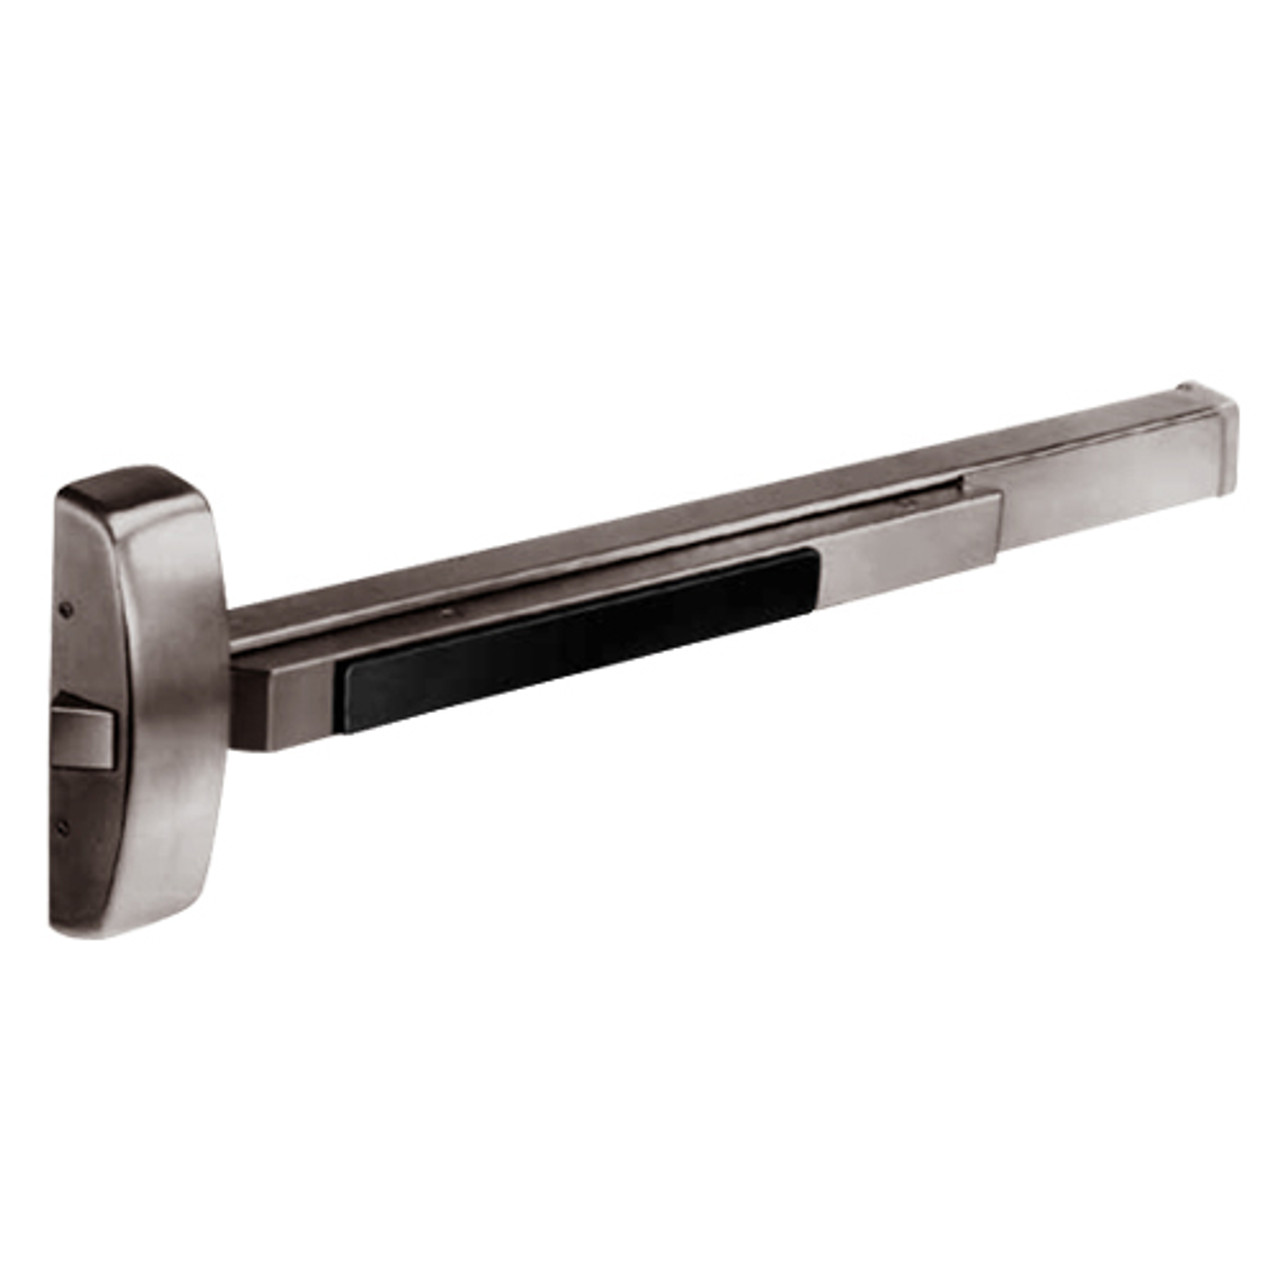 12-8810E-32D Sargent 80 Series Exit Only Fire Rated Rim Exit Device in Satin Stainless Steel